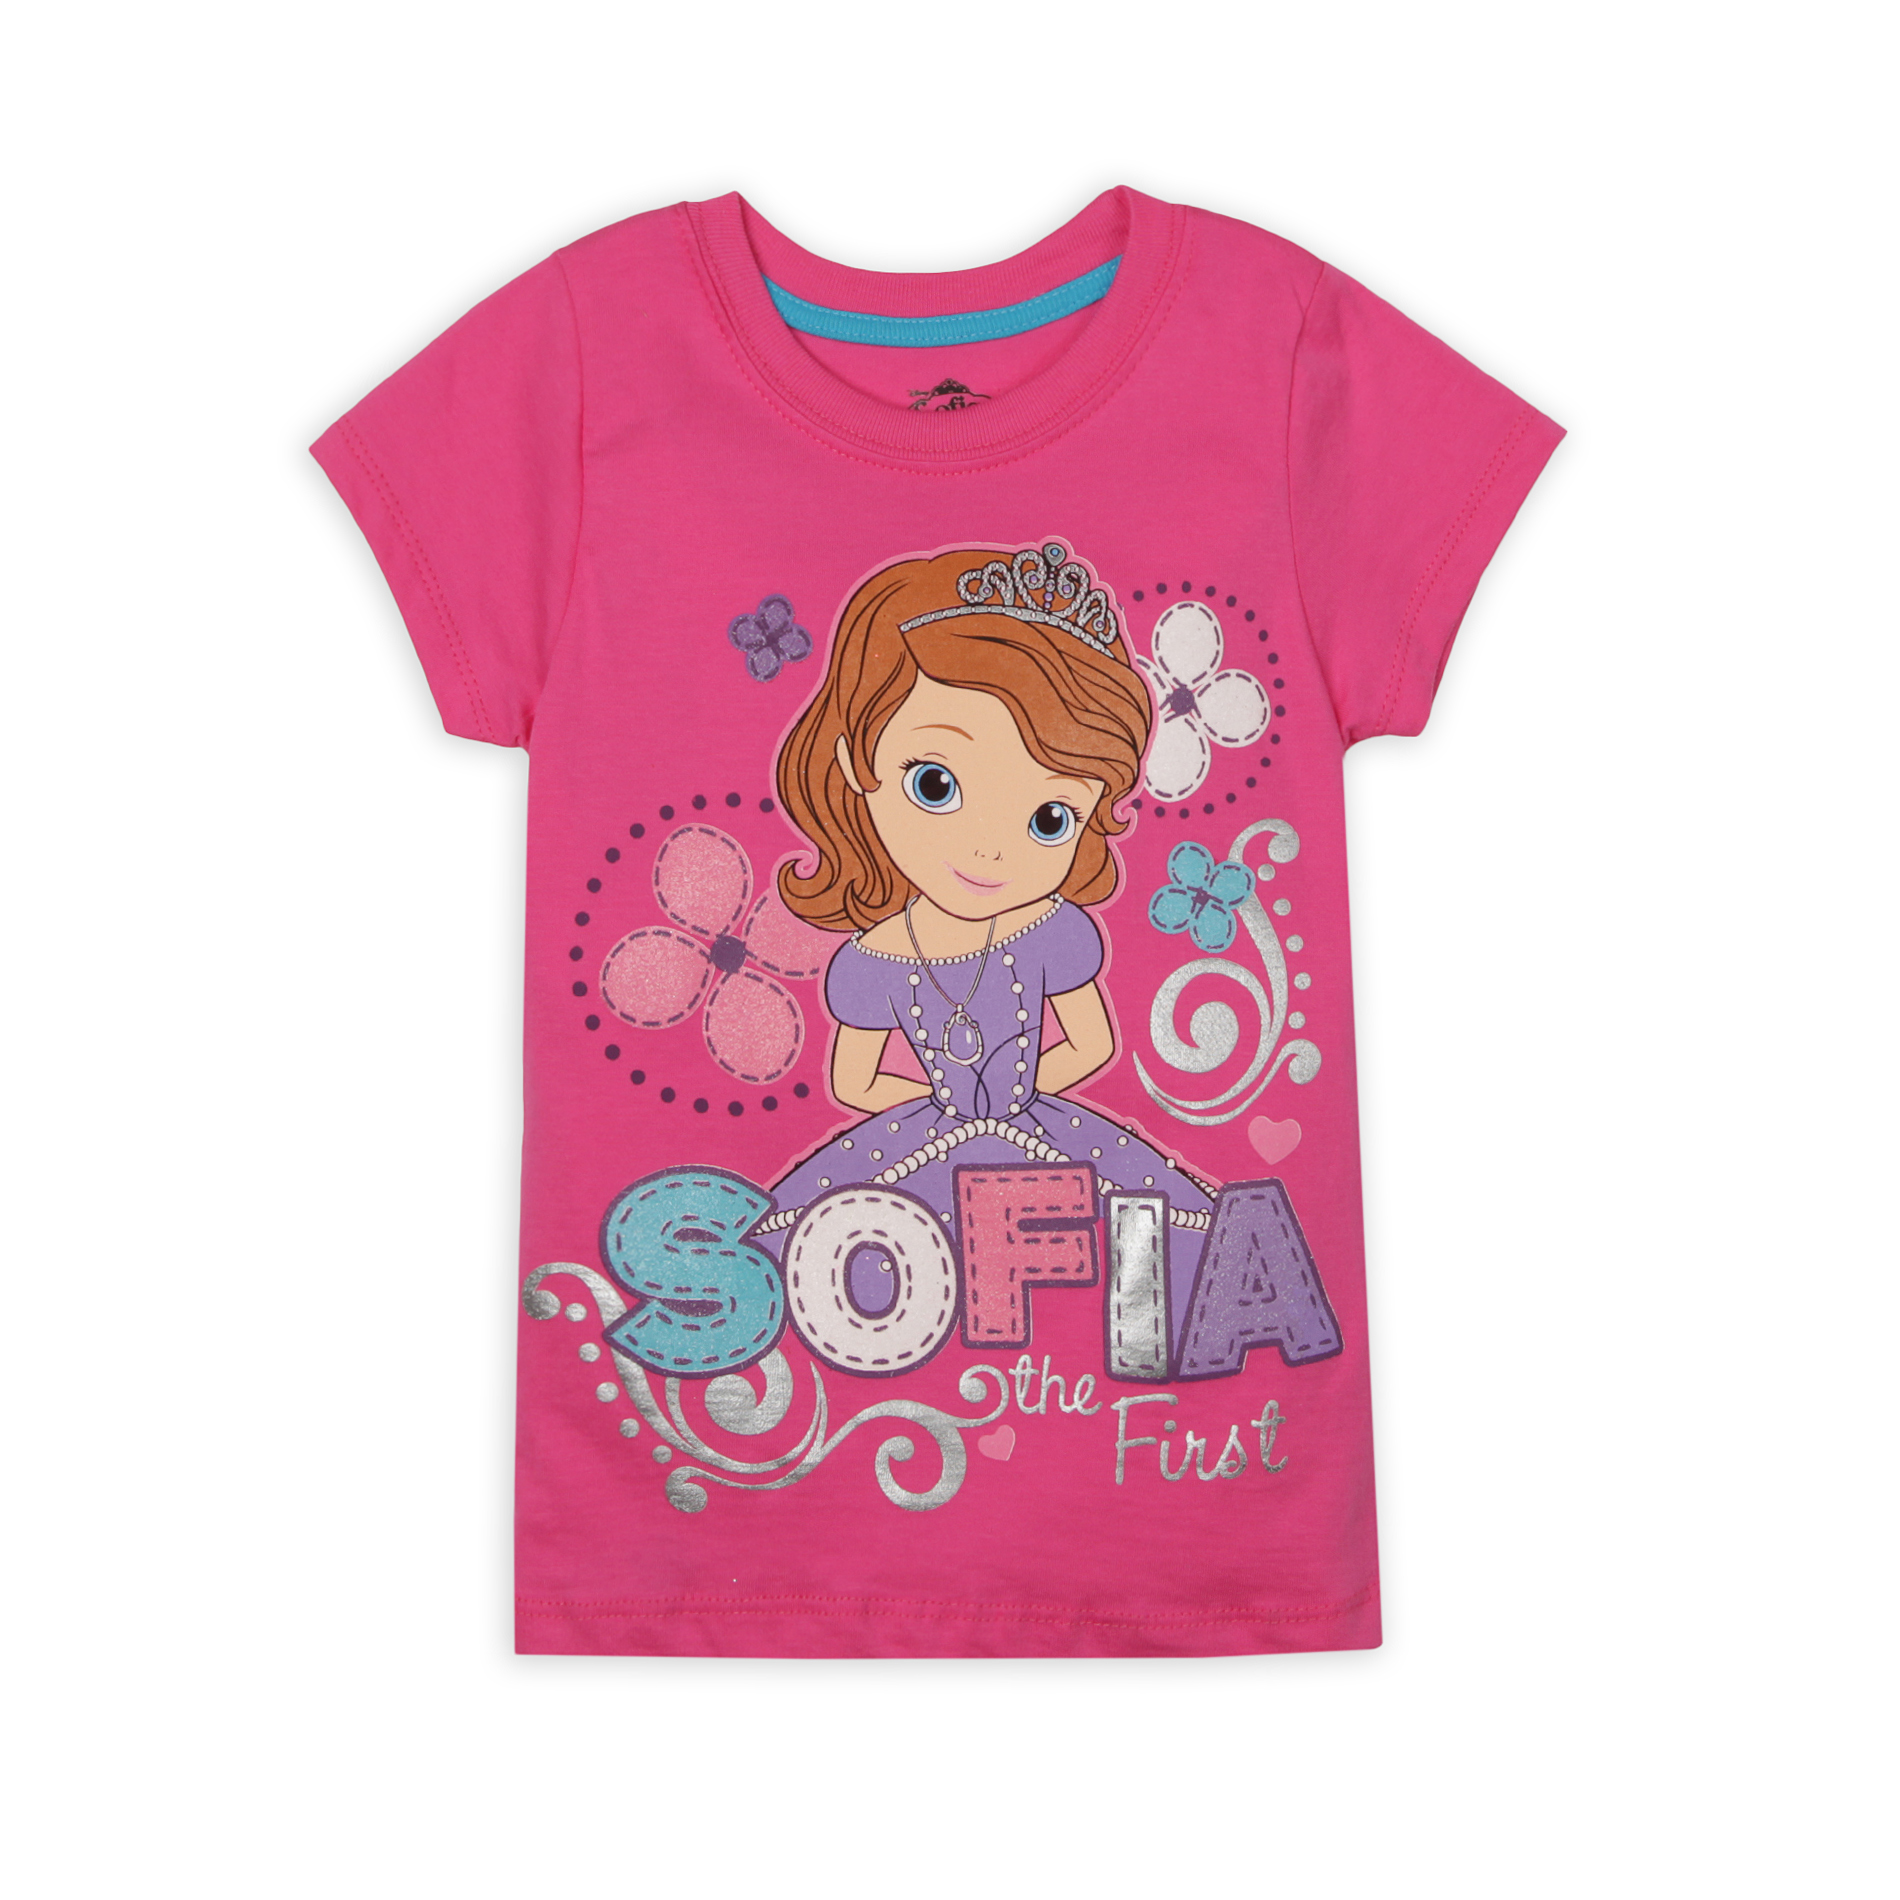 Disney Girl's Graphic T-Shirt - Sofia The First